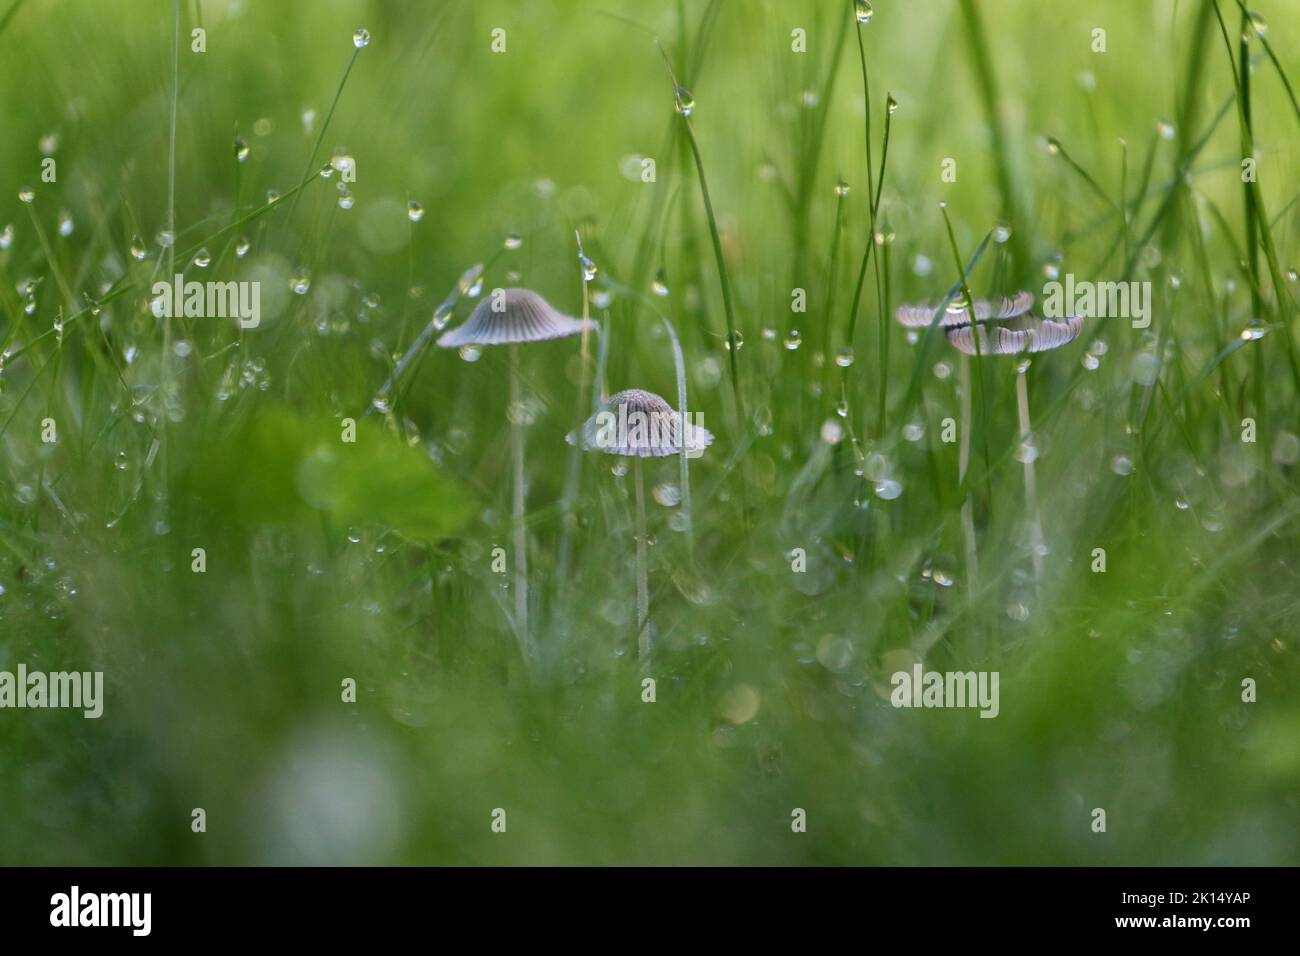 Tiny Mushrooms and blades of grass with dew drops in a lawn close up in in the early morning Stock Photo